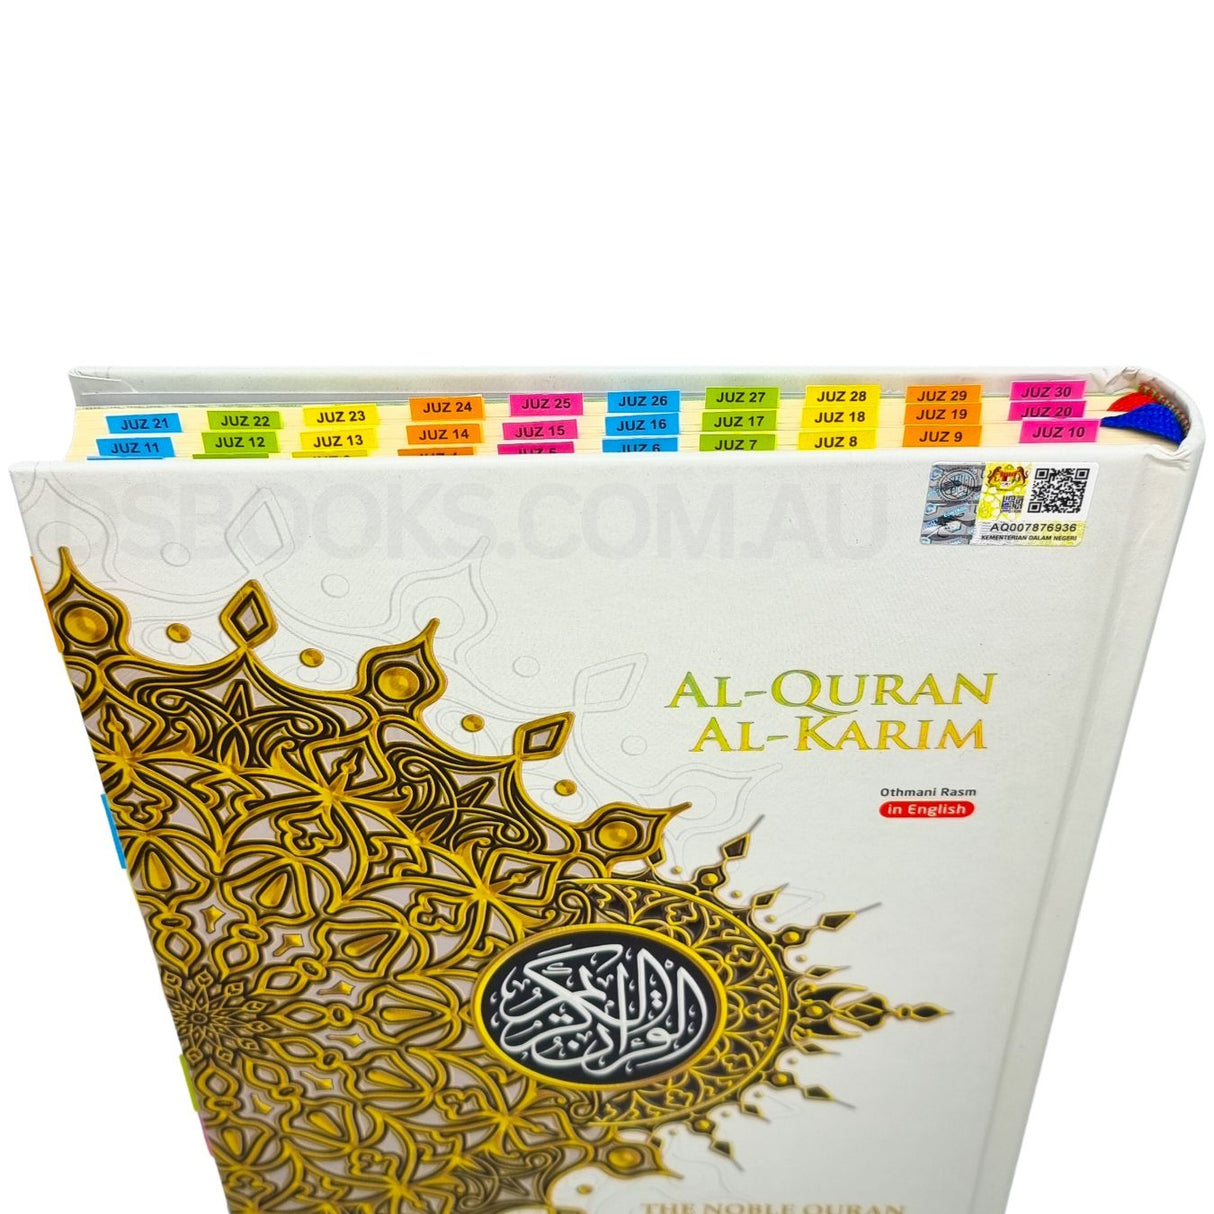 Maqdis with subjects tags - Word for Word Quran - Large